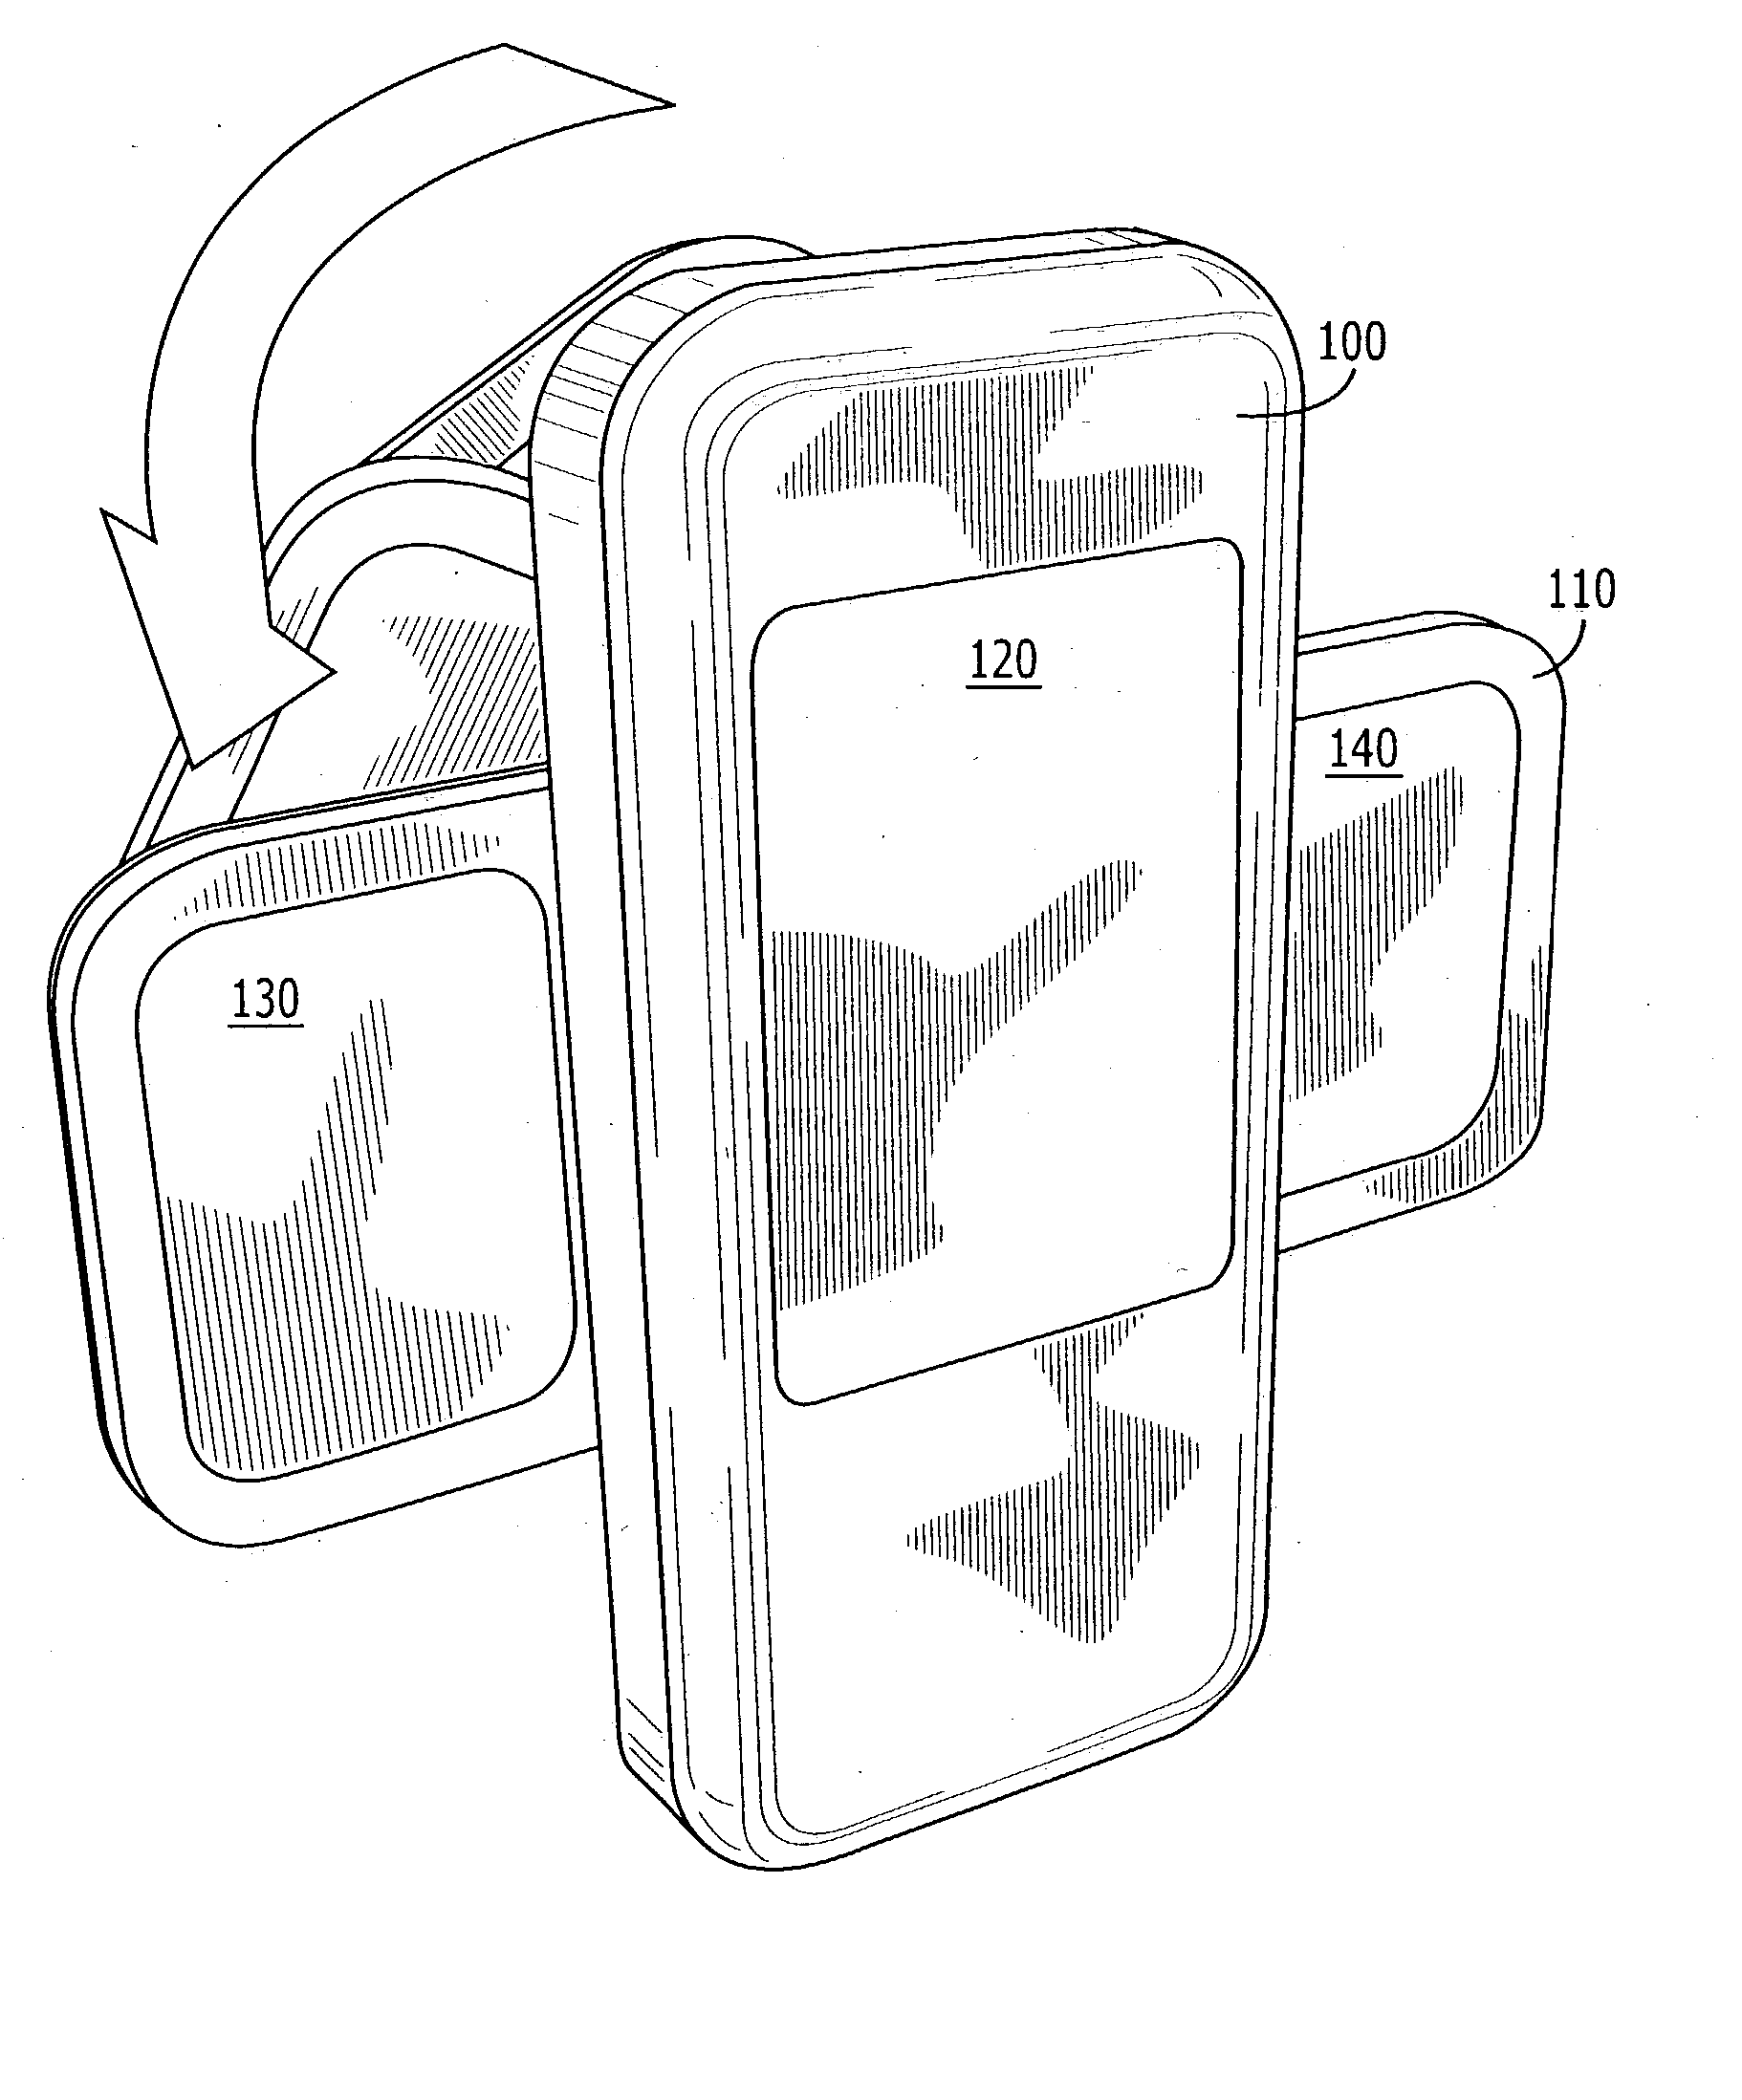 Mobile computing devices having rotationally exposed user interface devices